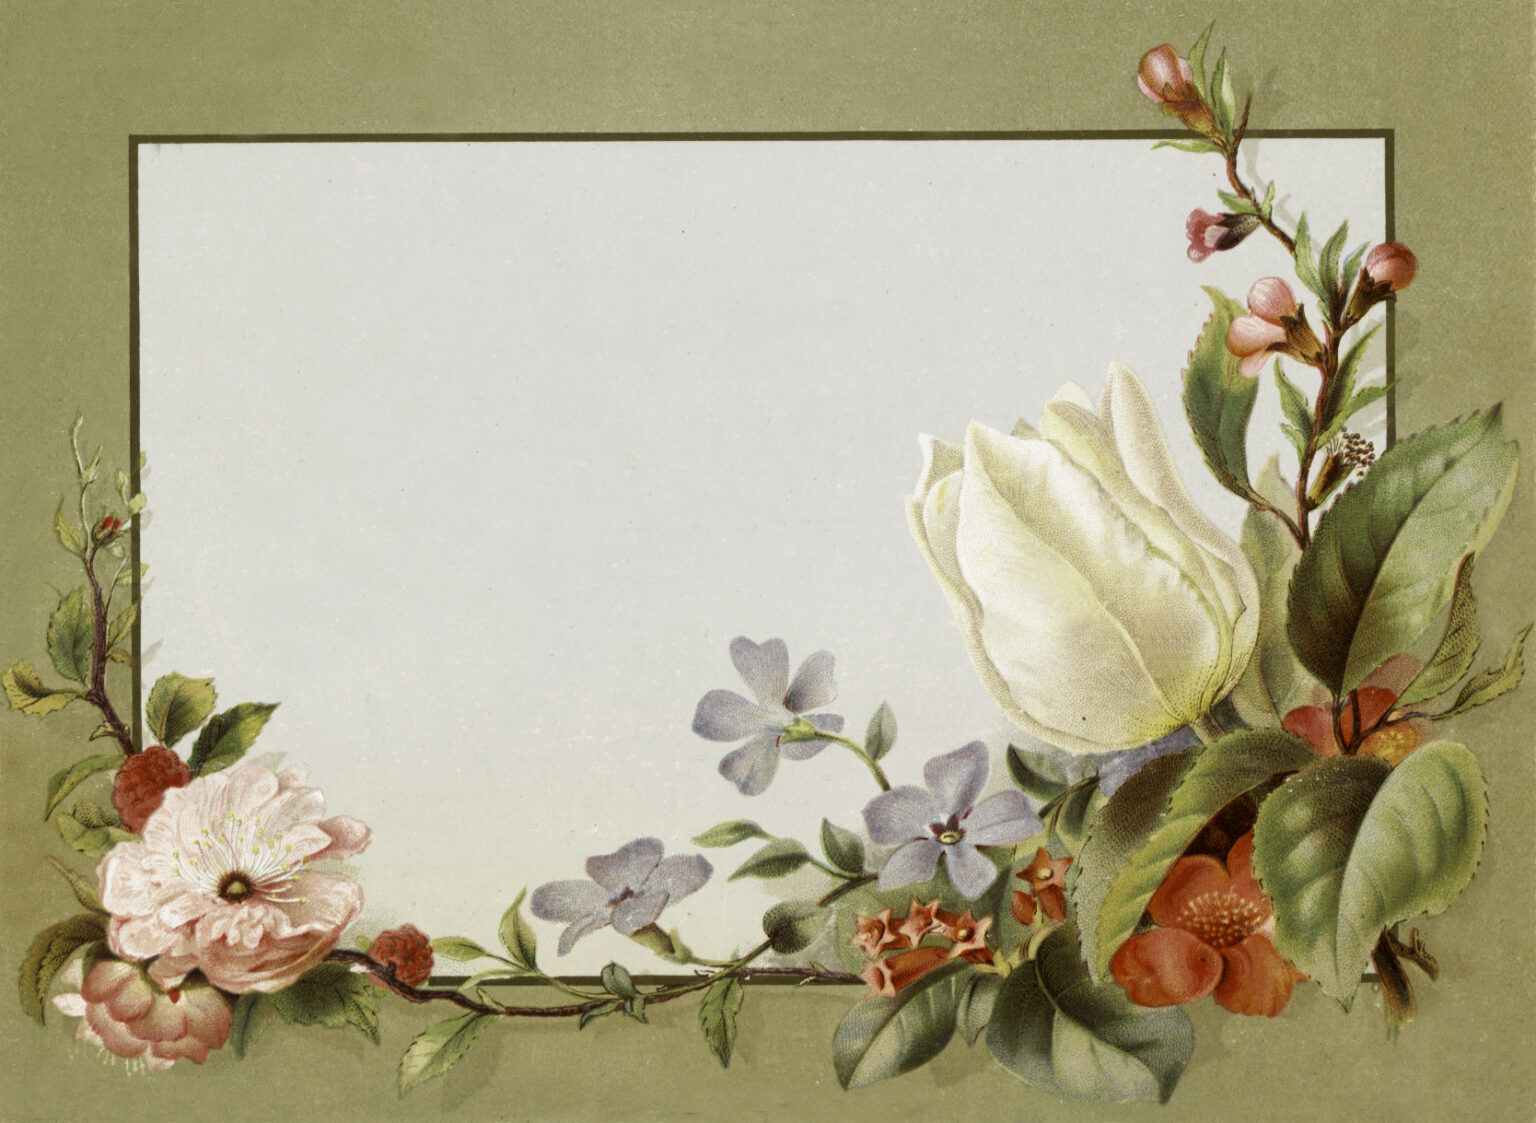 26 Victorian Calling Card Images! - The Graphics Fairy